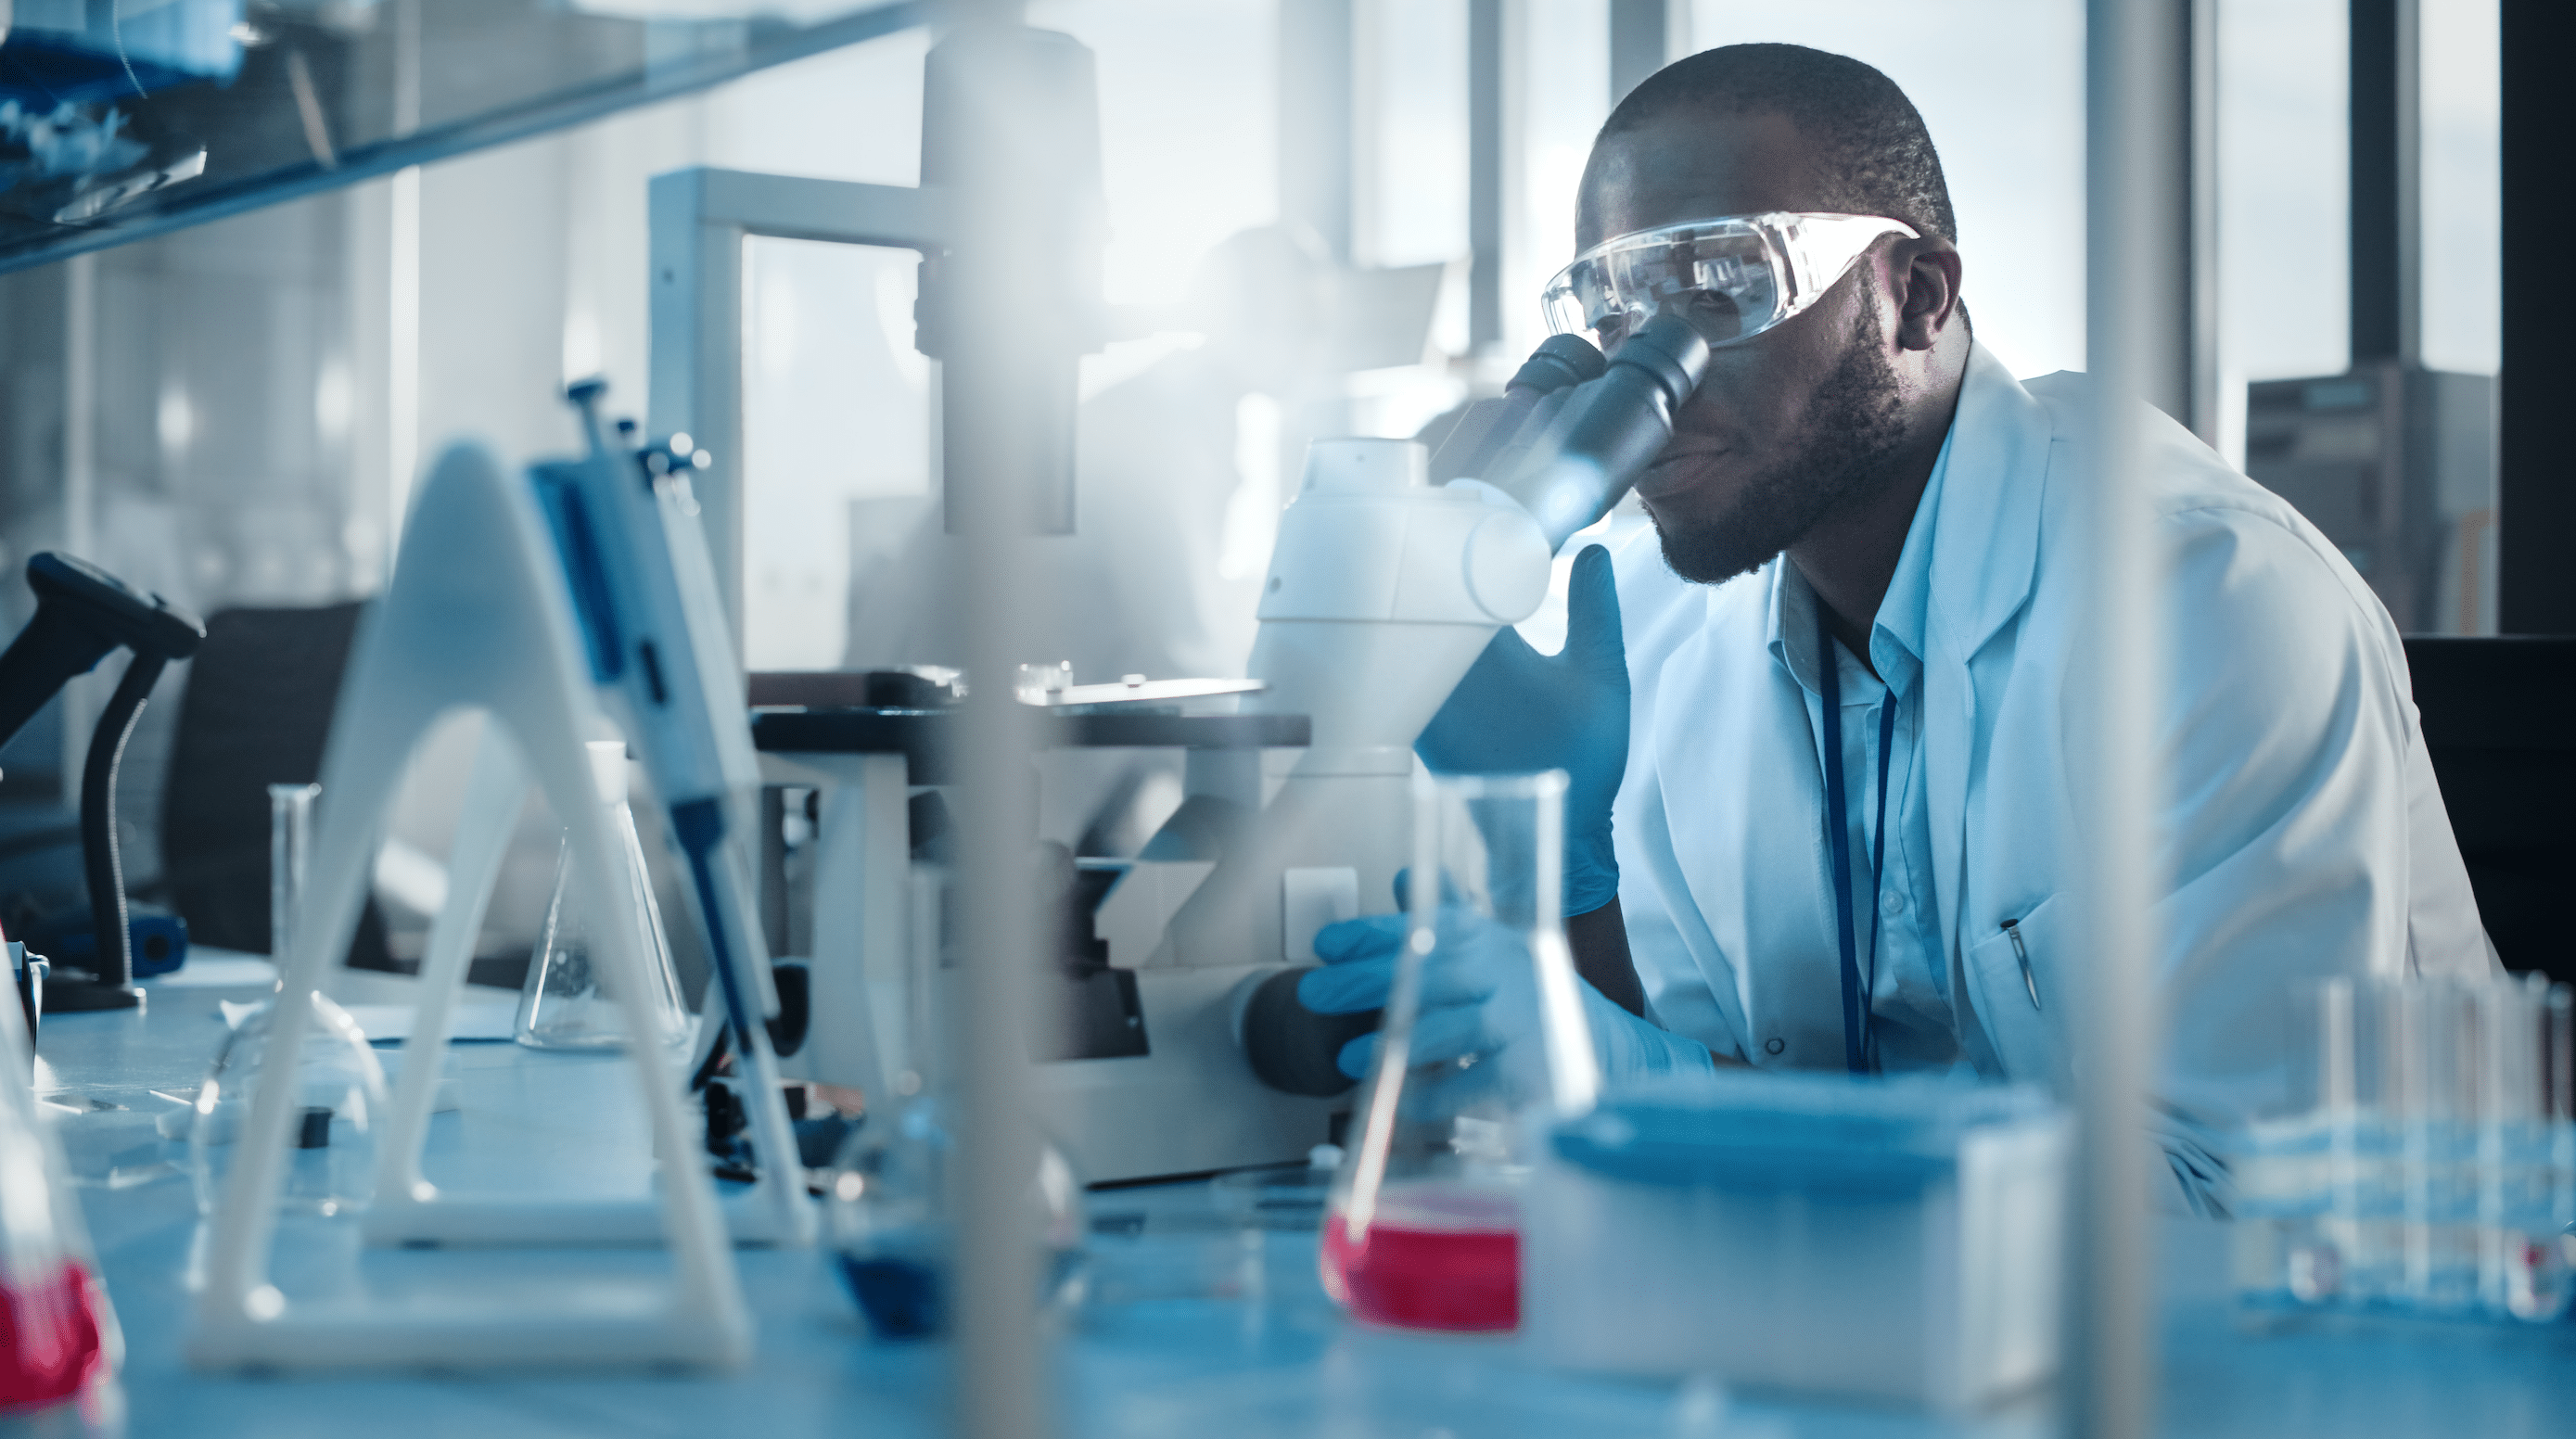 Medical Development Laboratory: Black Male Scientist Looking Under Microscope, Inspecting Petri Dish. Professionals Working in Advanced Scientific Lab doing Medicine, Vaccine, Biotechnology Research